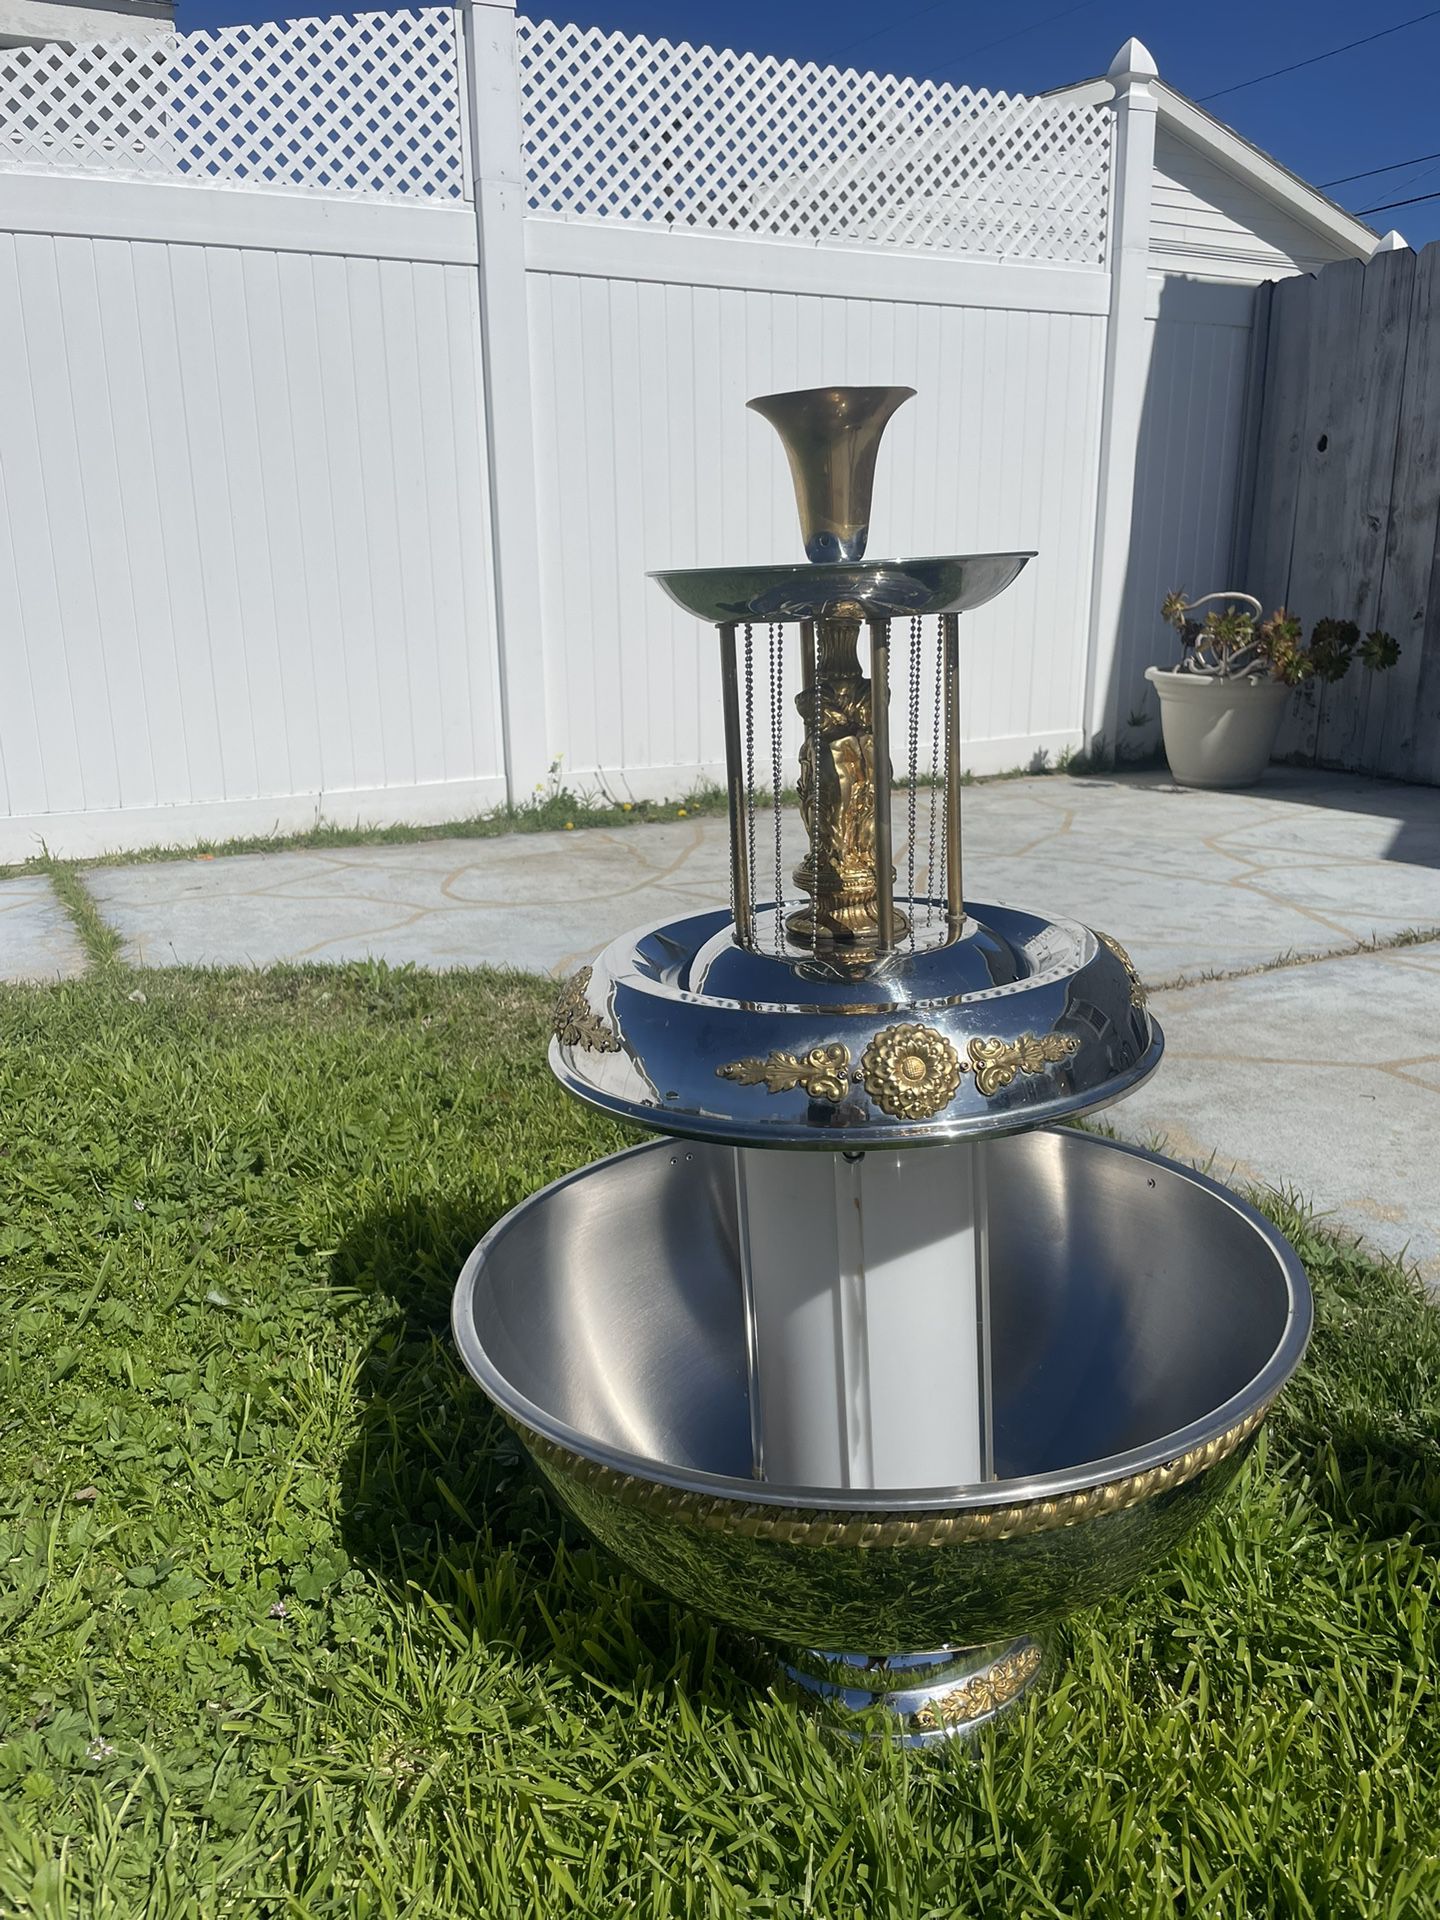 5 Gal Stainless Champagne Fountain